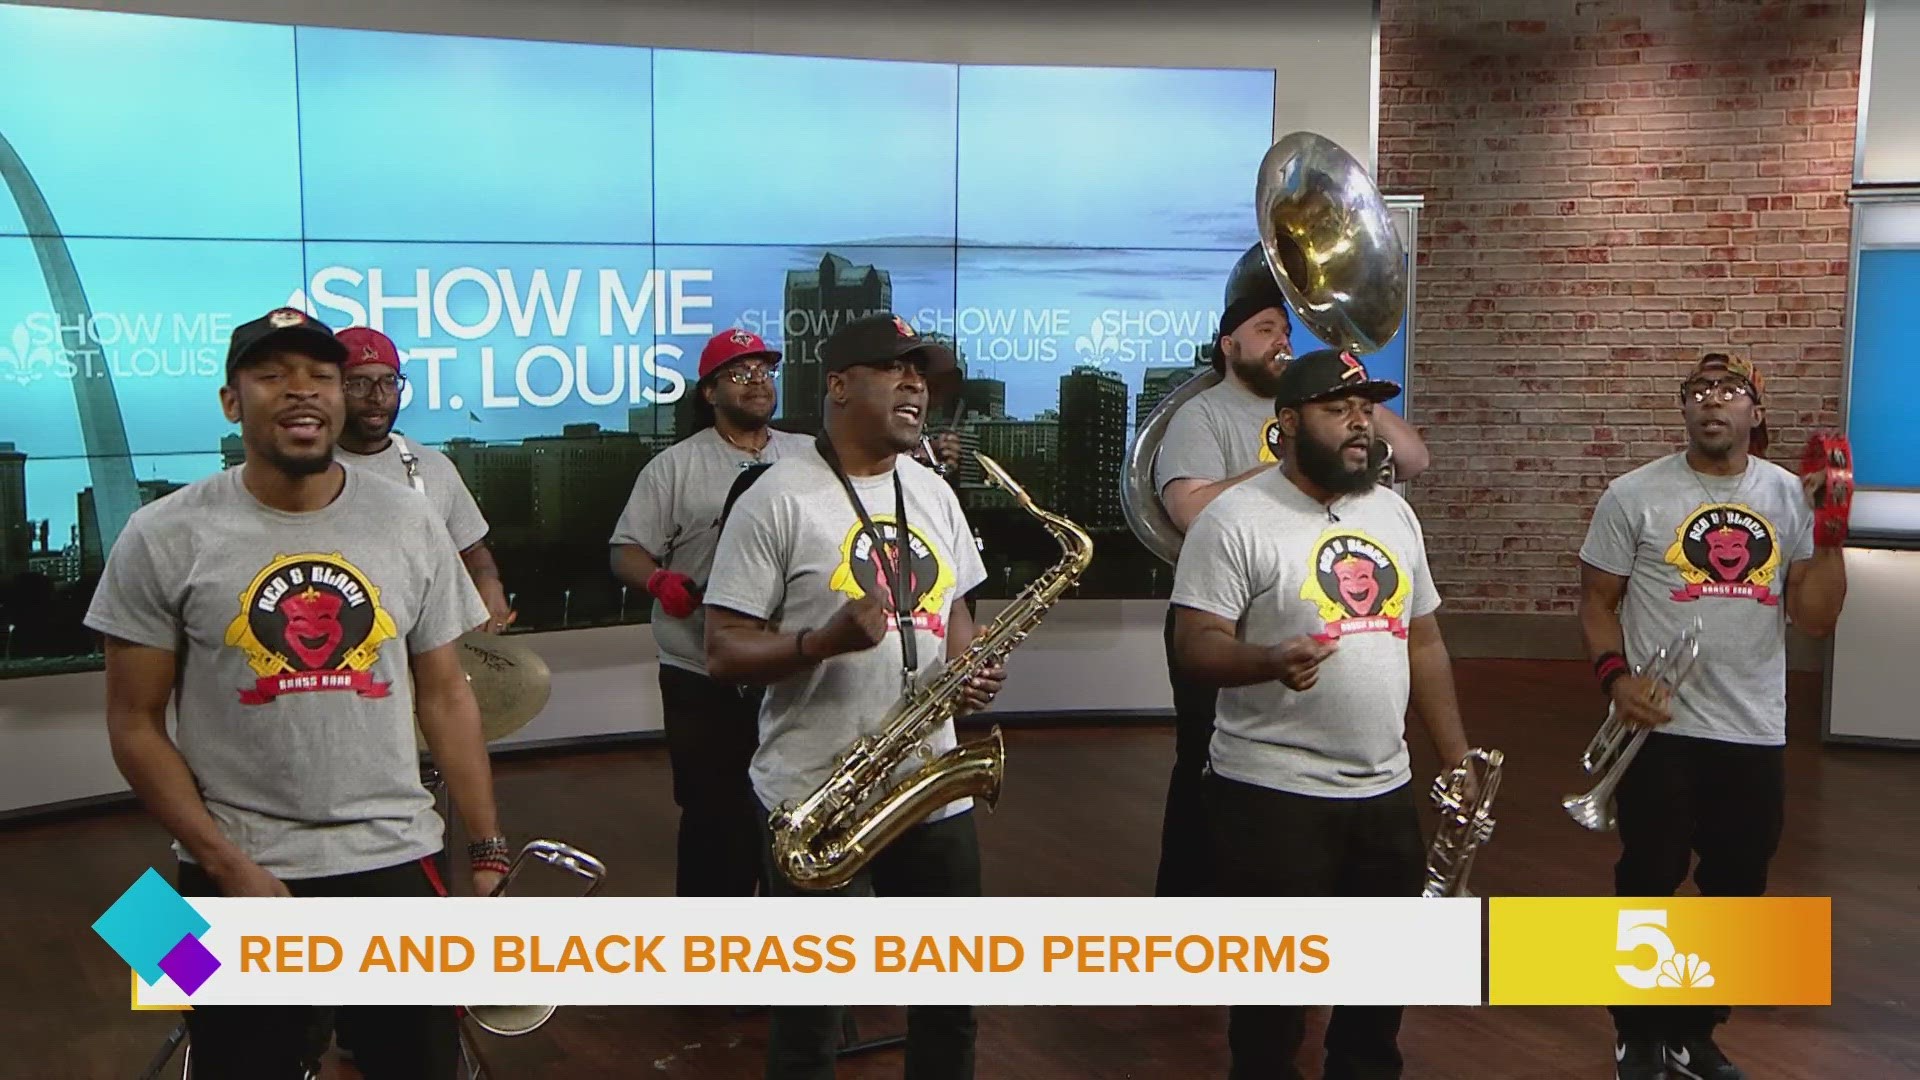 The Red & Black Brass Band performs an original song